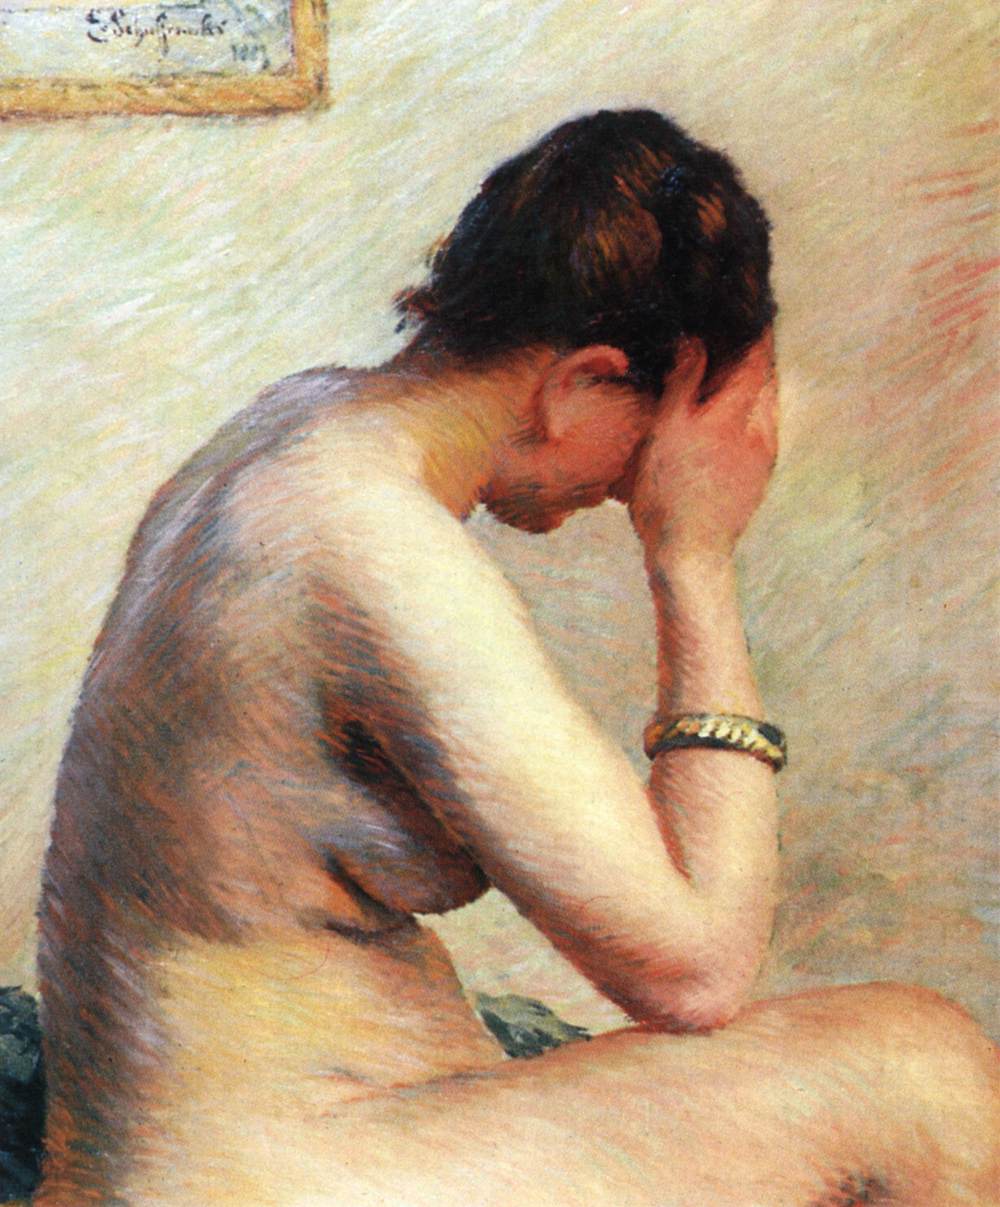 Naked Woman Sitting on a Bed